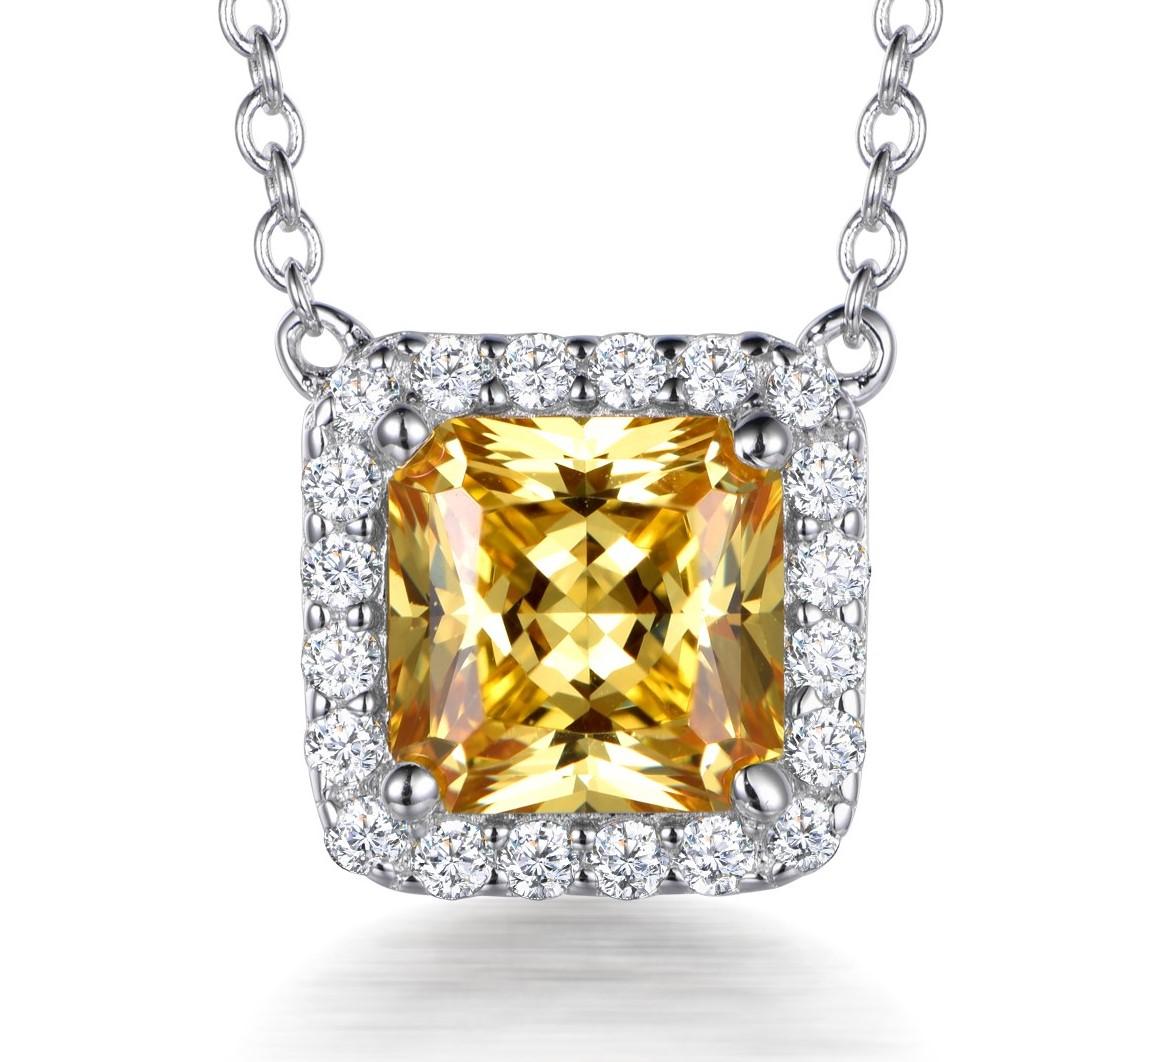 Golden honey tones emanate from this stylish 3.00ct yellow asscher cut cubic zirconia surrounded by 20 smaller round brilliant cuts.

Composed of 925 sterling silver with a high gloss white rhodium finish.

Chain measures 16ins with a 2ins